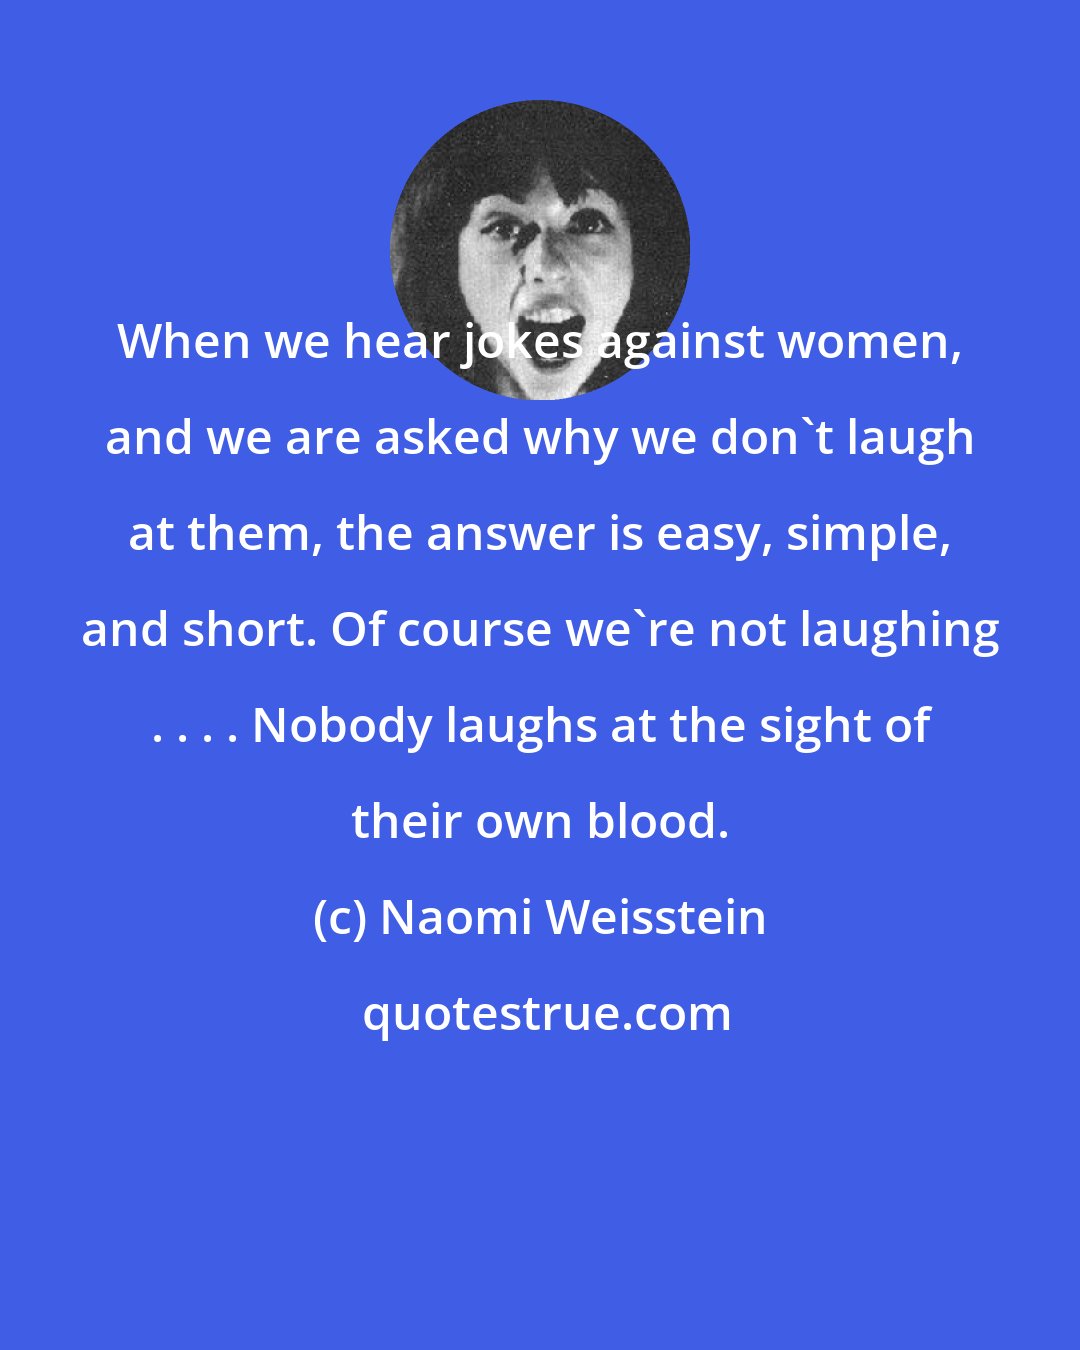 Naomi Weisstein: When we hear jokes against women, and we are asked why we don't laugh at them, the answer is easy, simple, and short. Of course we're not laughing . . . . Nobody laughs at the sight of their own blood.